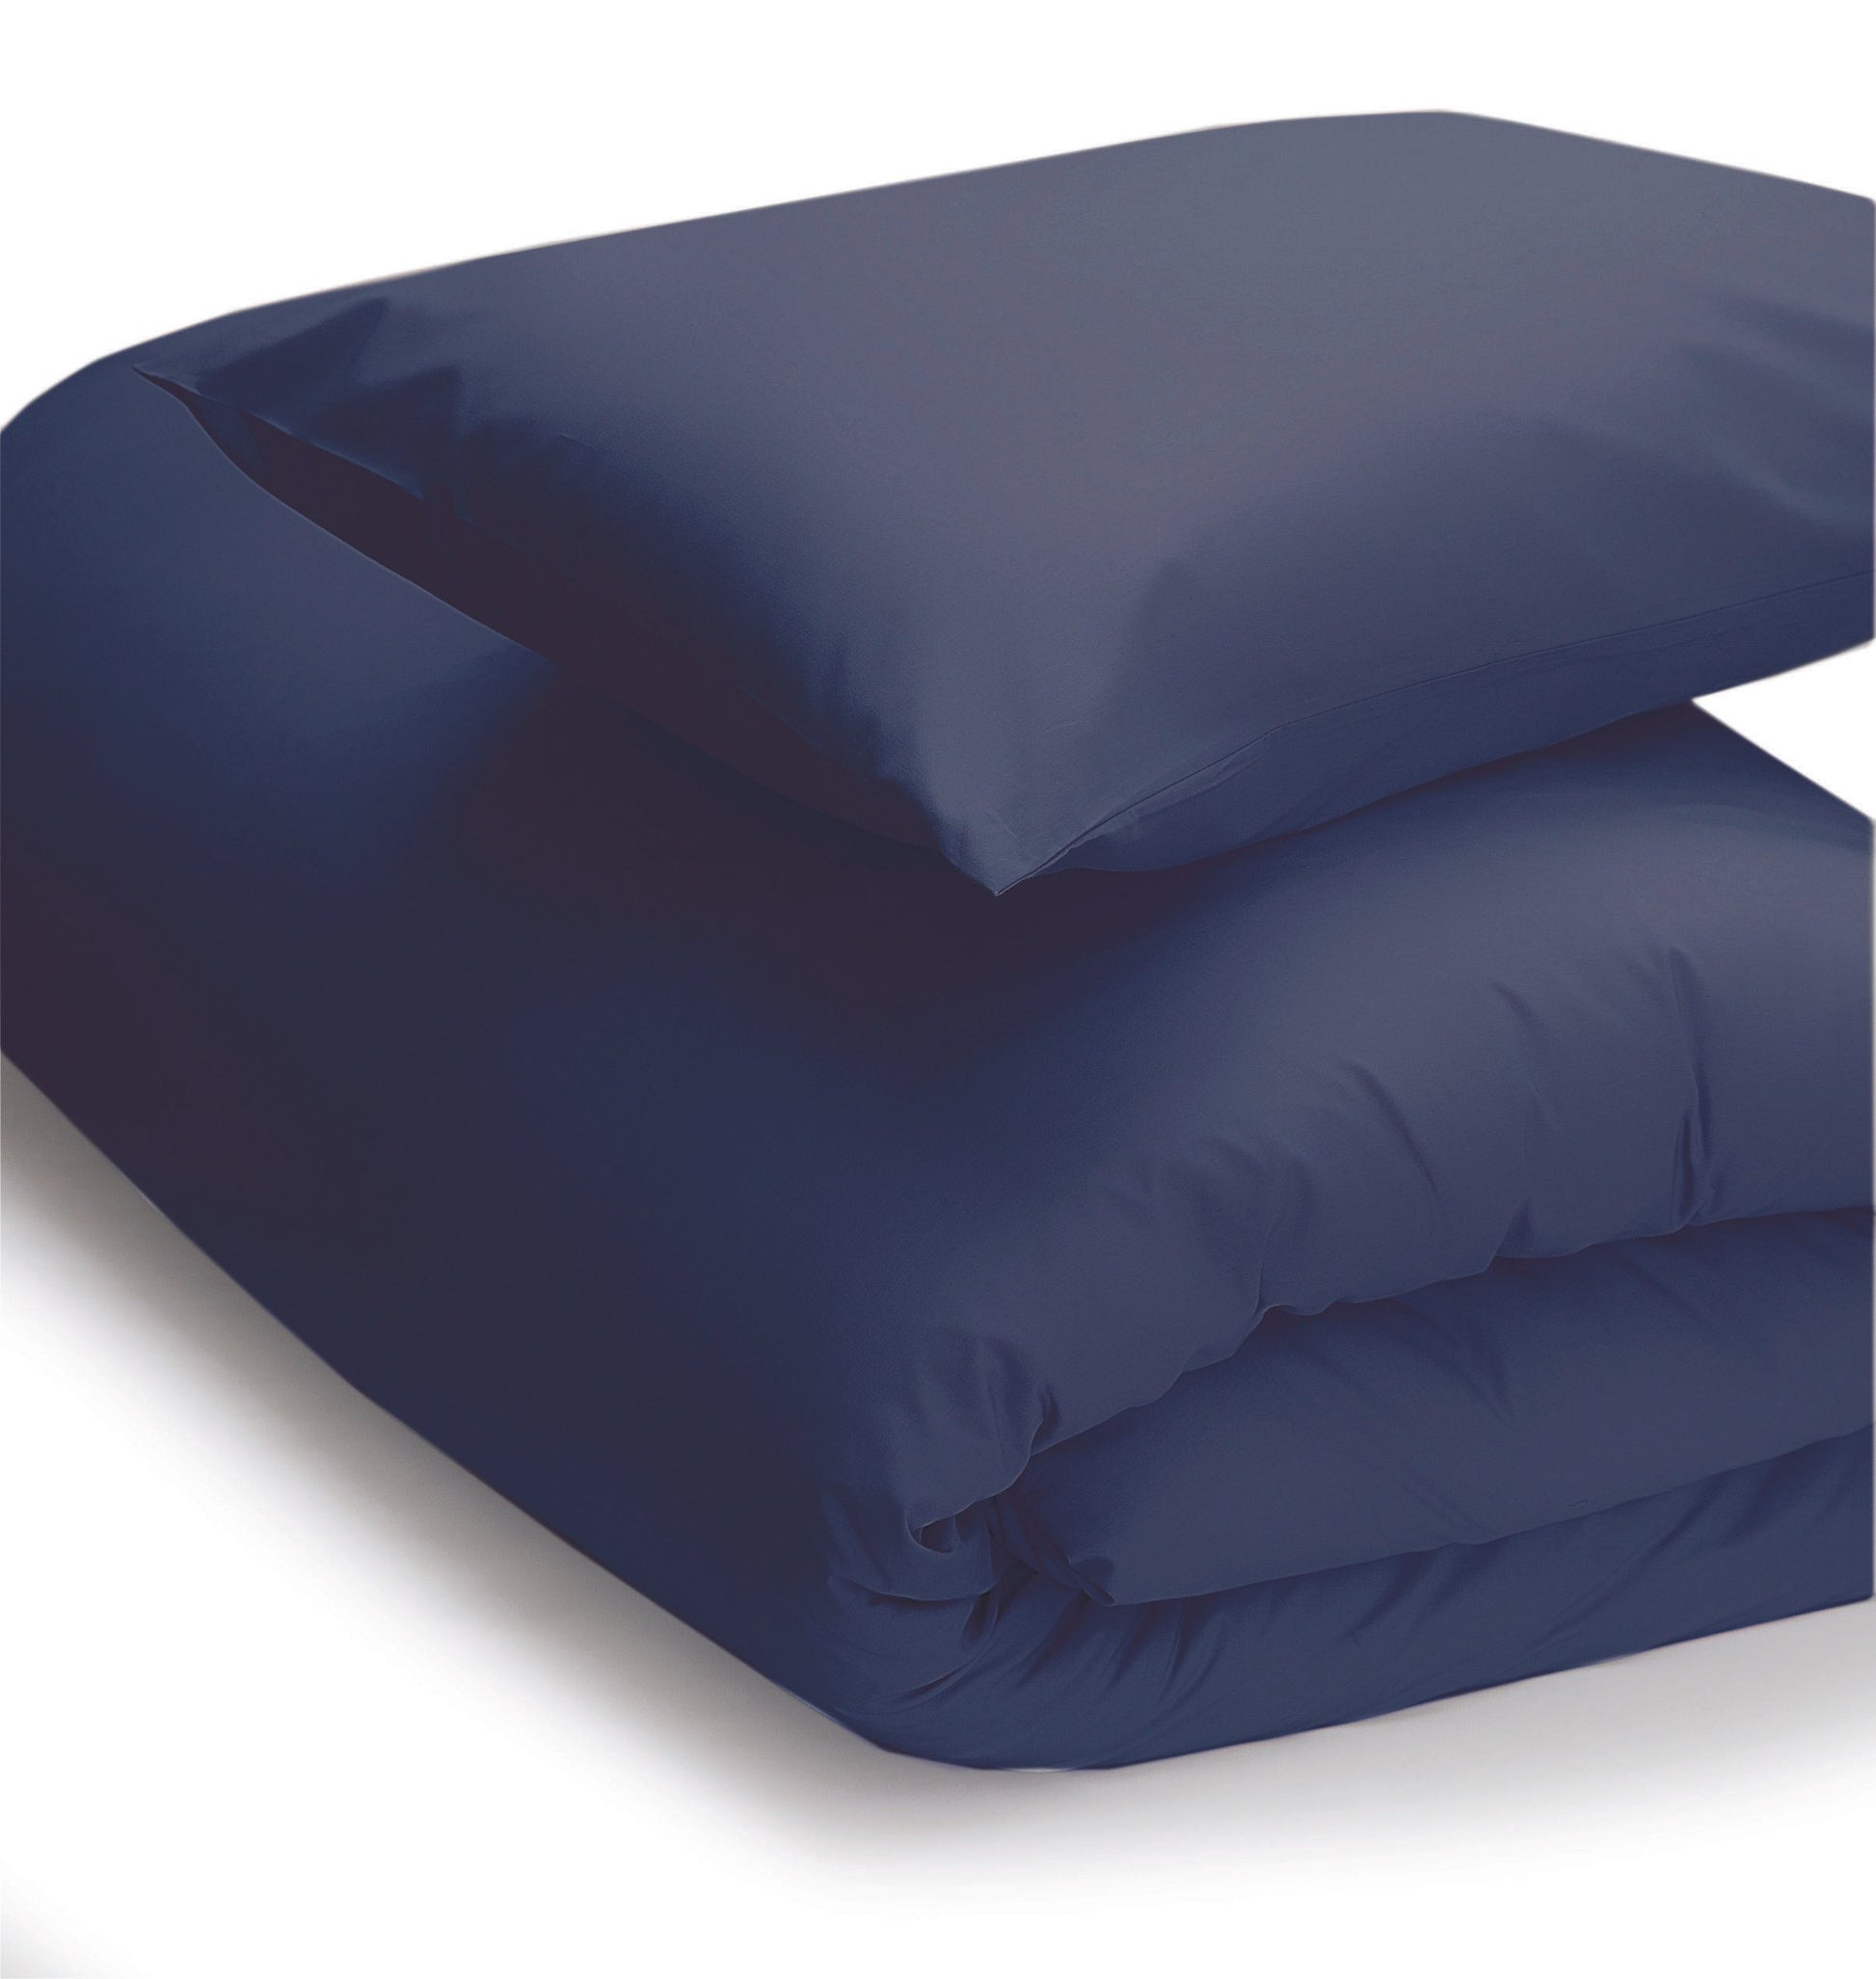 Navy colour bedding pack